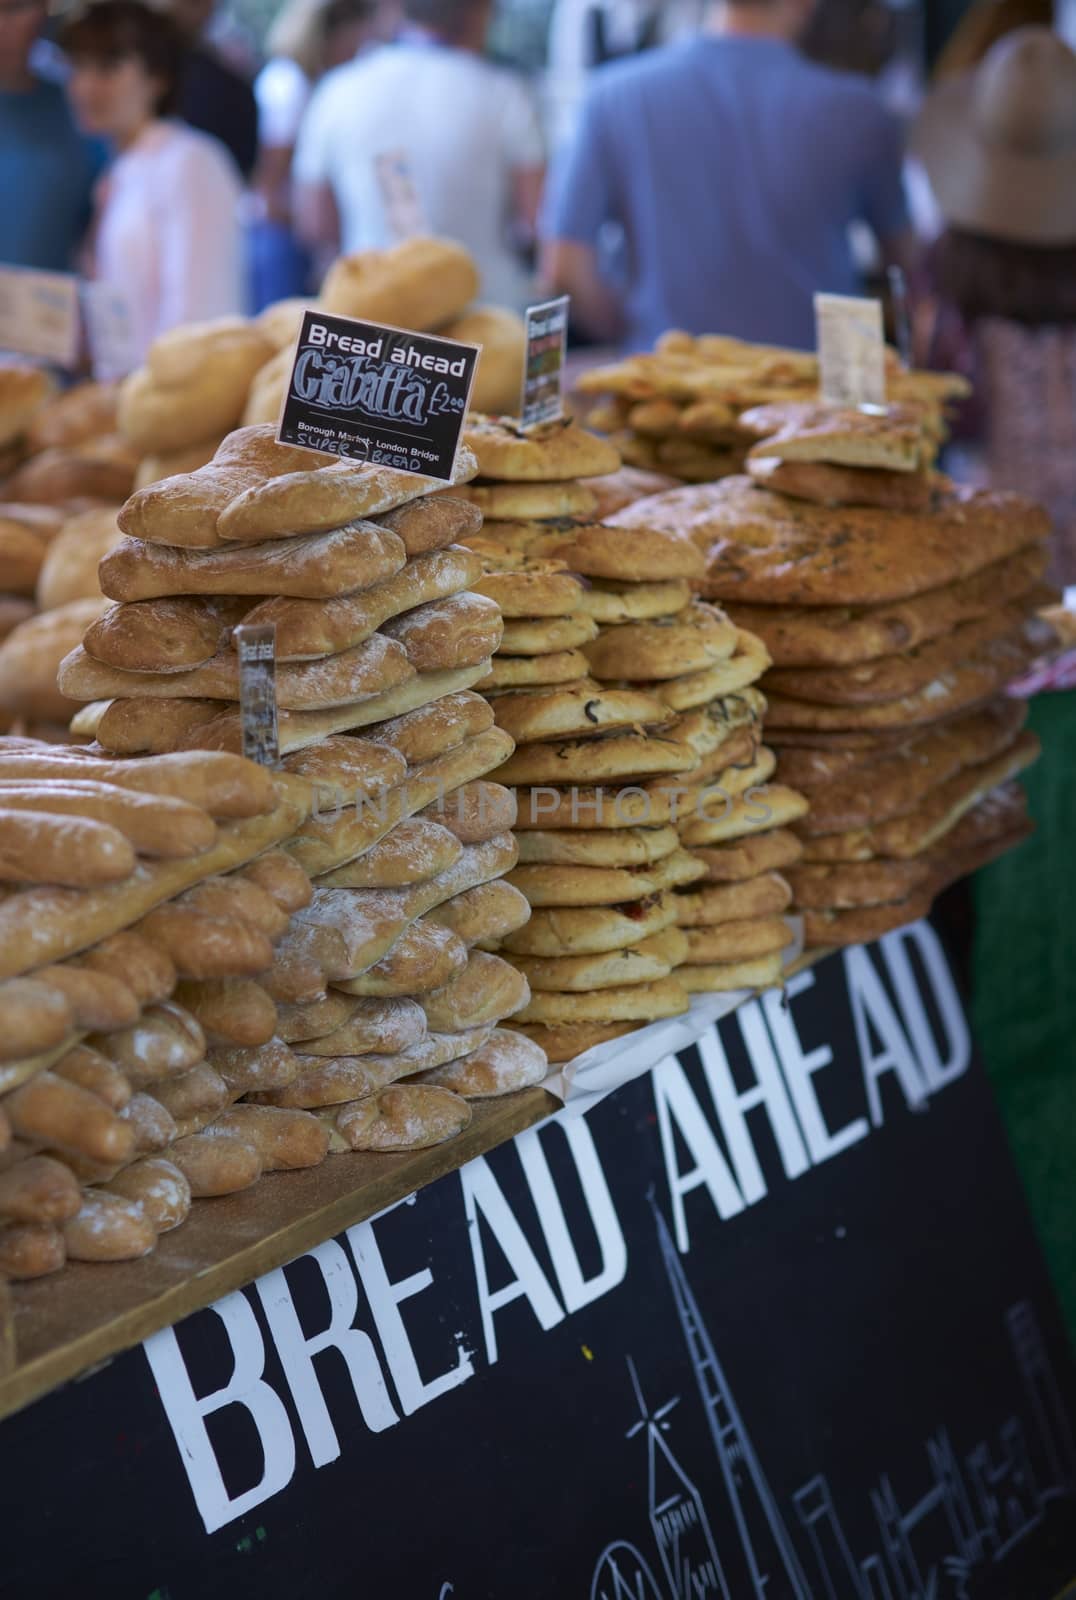 Bread for sale on a market stall in Borough Market, London, England